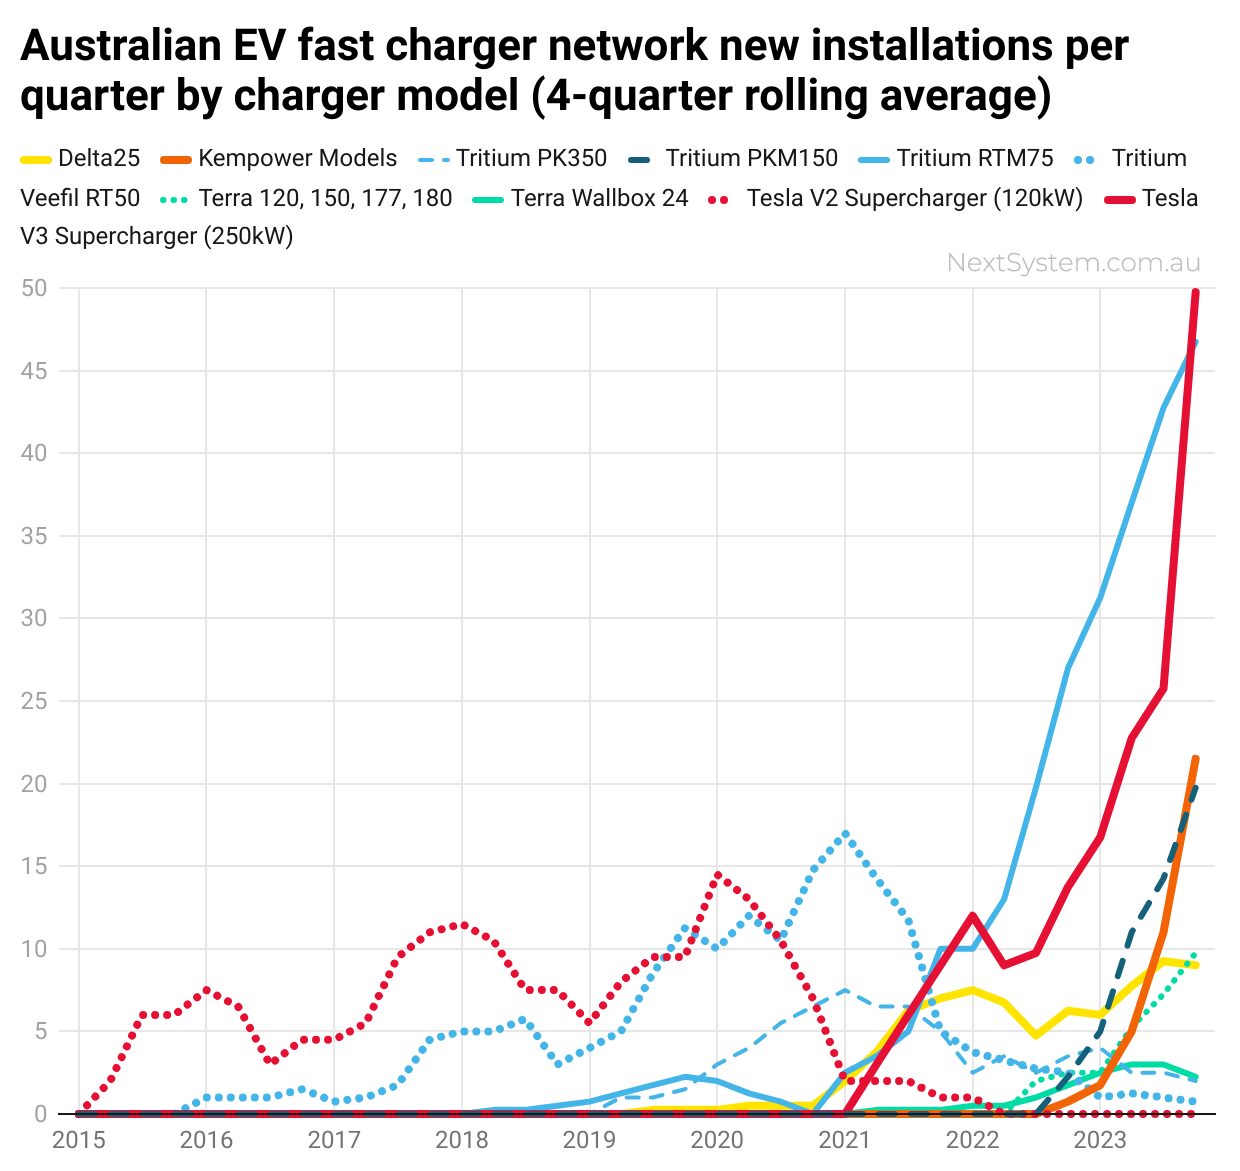 Australian EV fast charger network new installations per quarter by charger model (4-quarter rolling average)